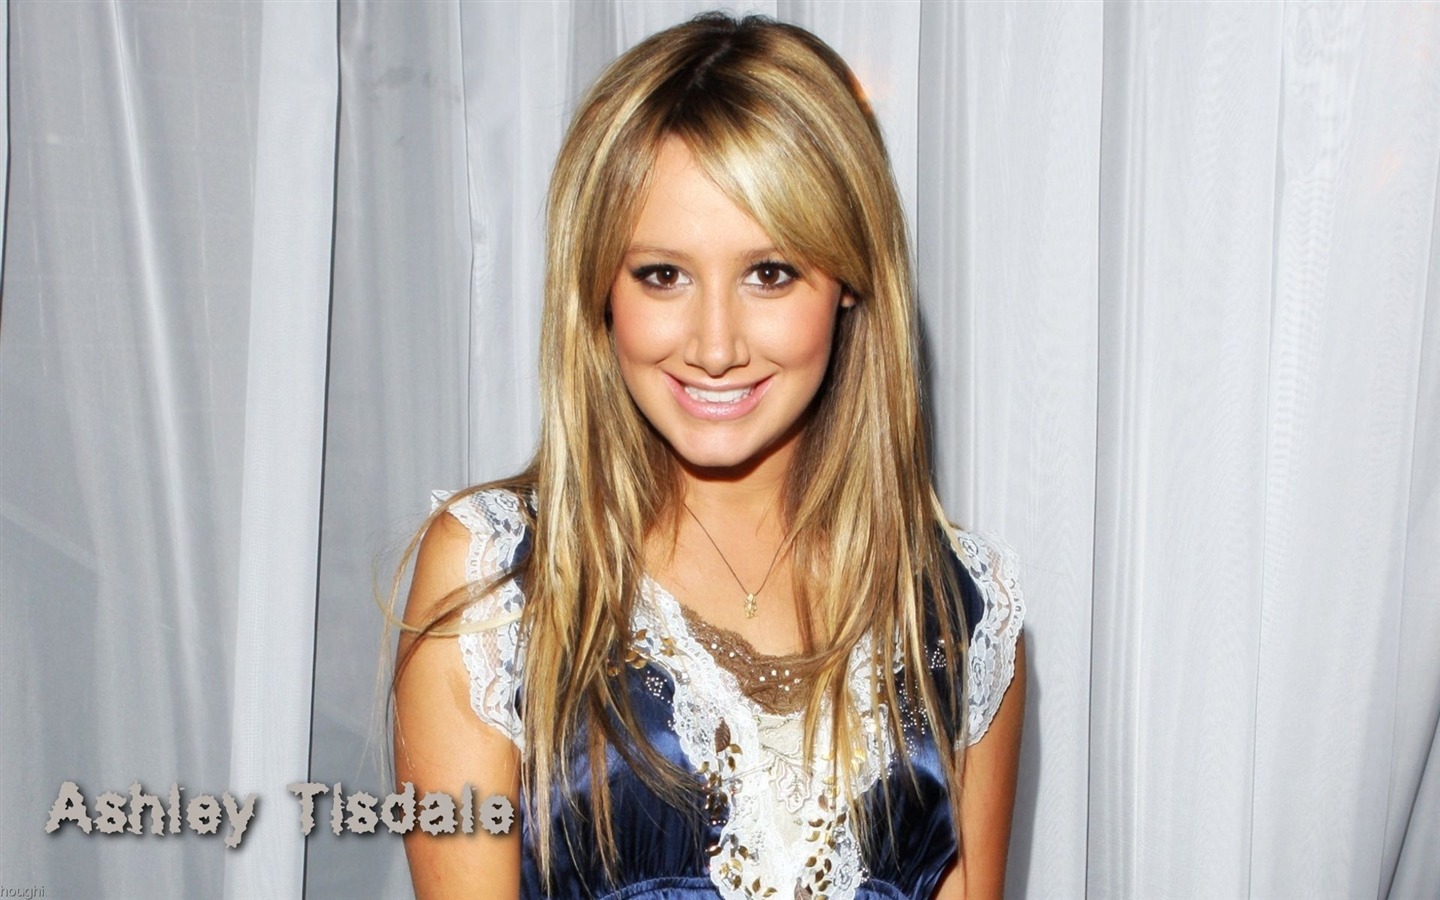 Ashley Tisdale #021 - 1440x900 Wallpapers Pictures Photos Images